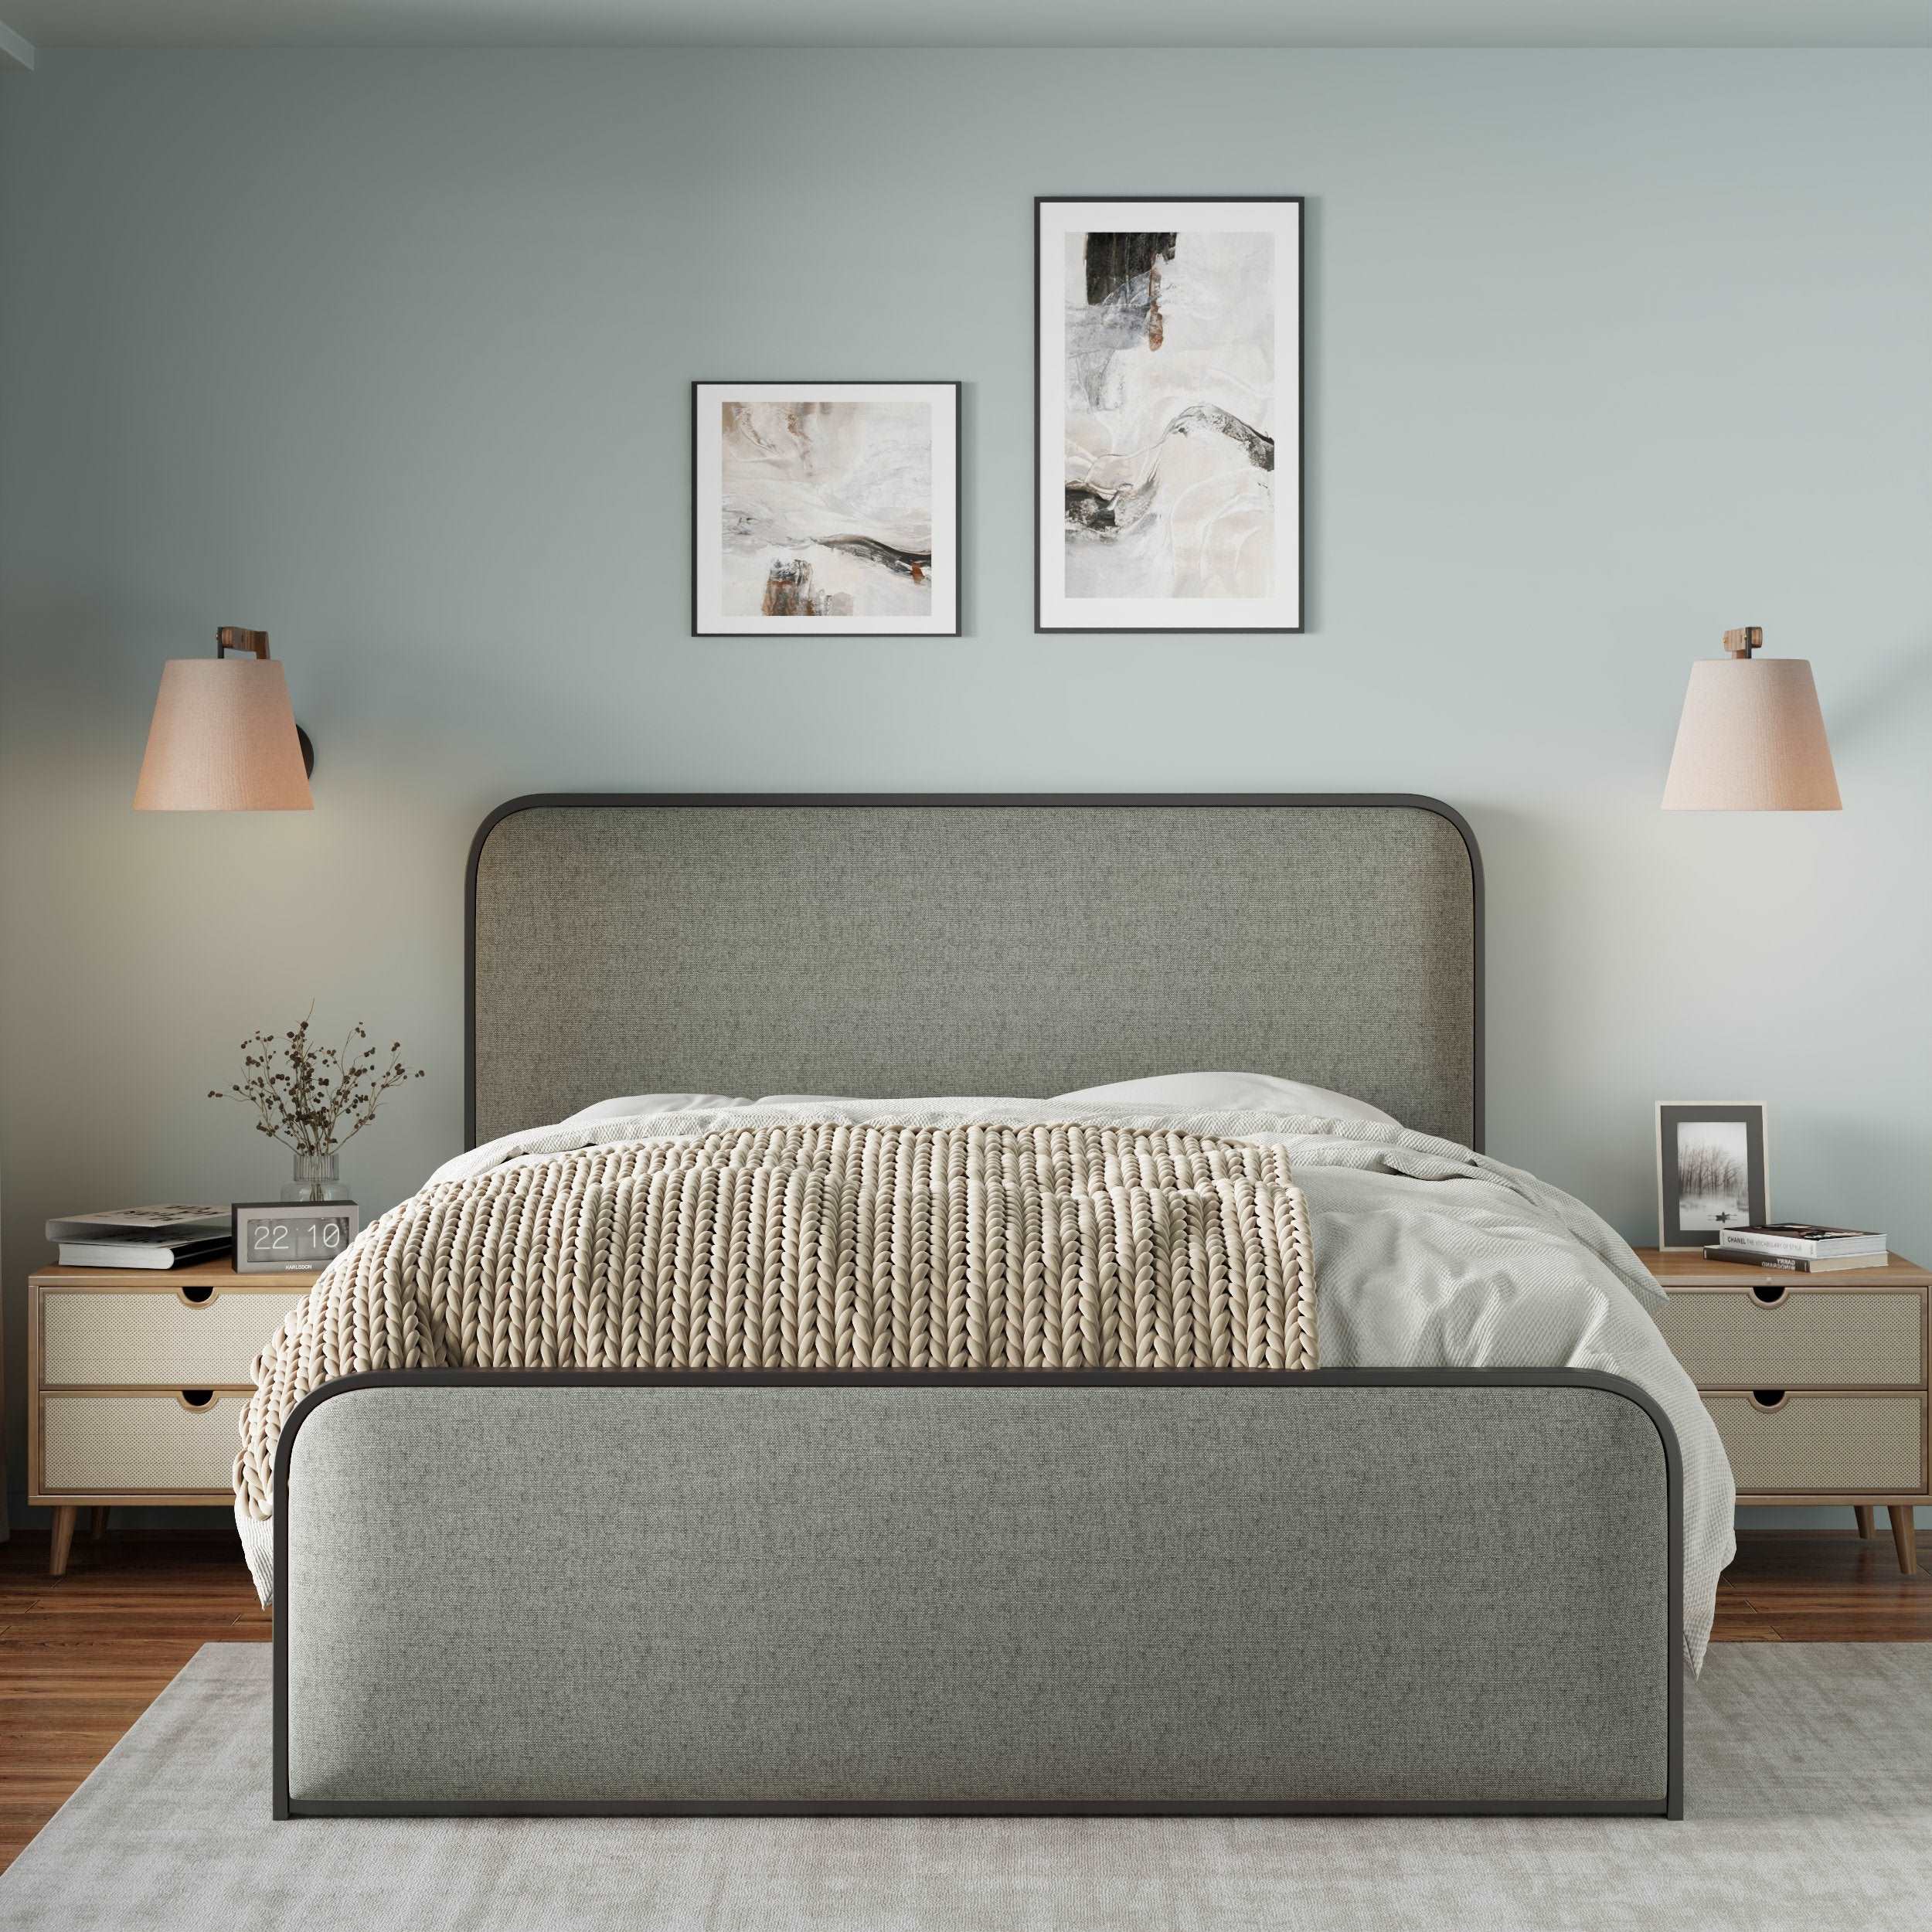 Bellemave Modern Metal Bed Frame with Curved Upholstered Headboard and Footboard Bed with Under Bed Storage, Heavy Duty Metal Slats